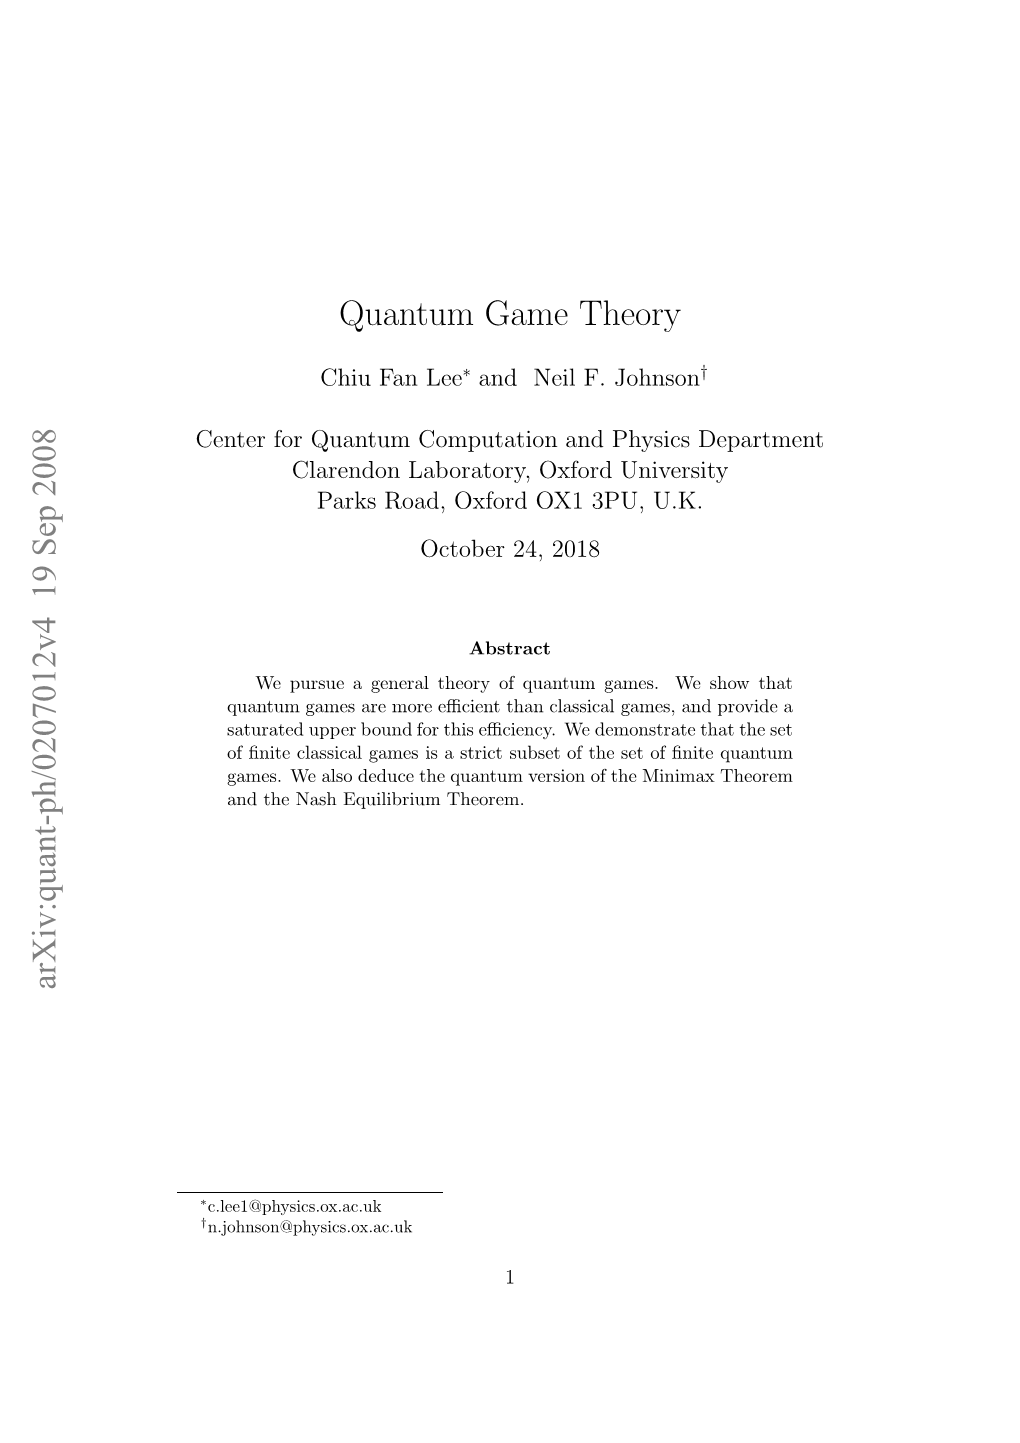 Efficiency and Formalism of Quantum Games